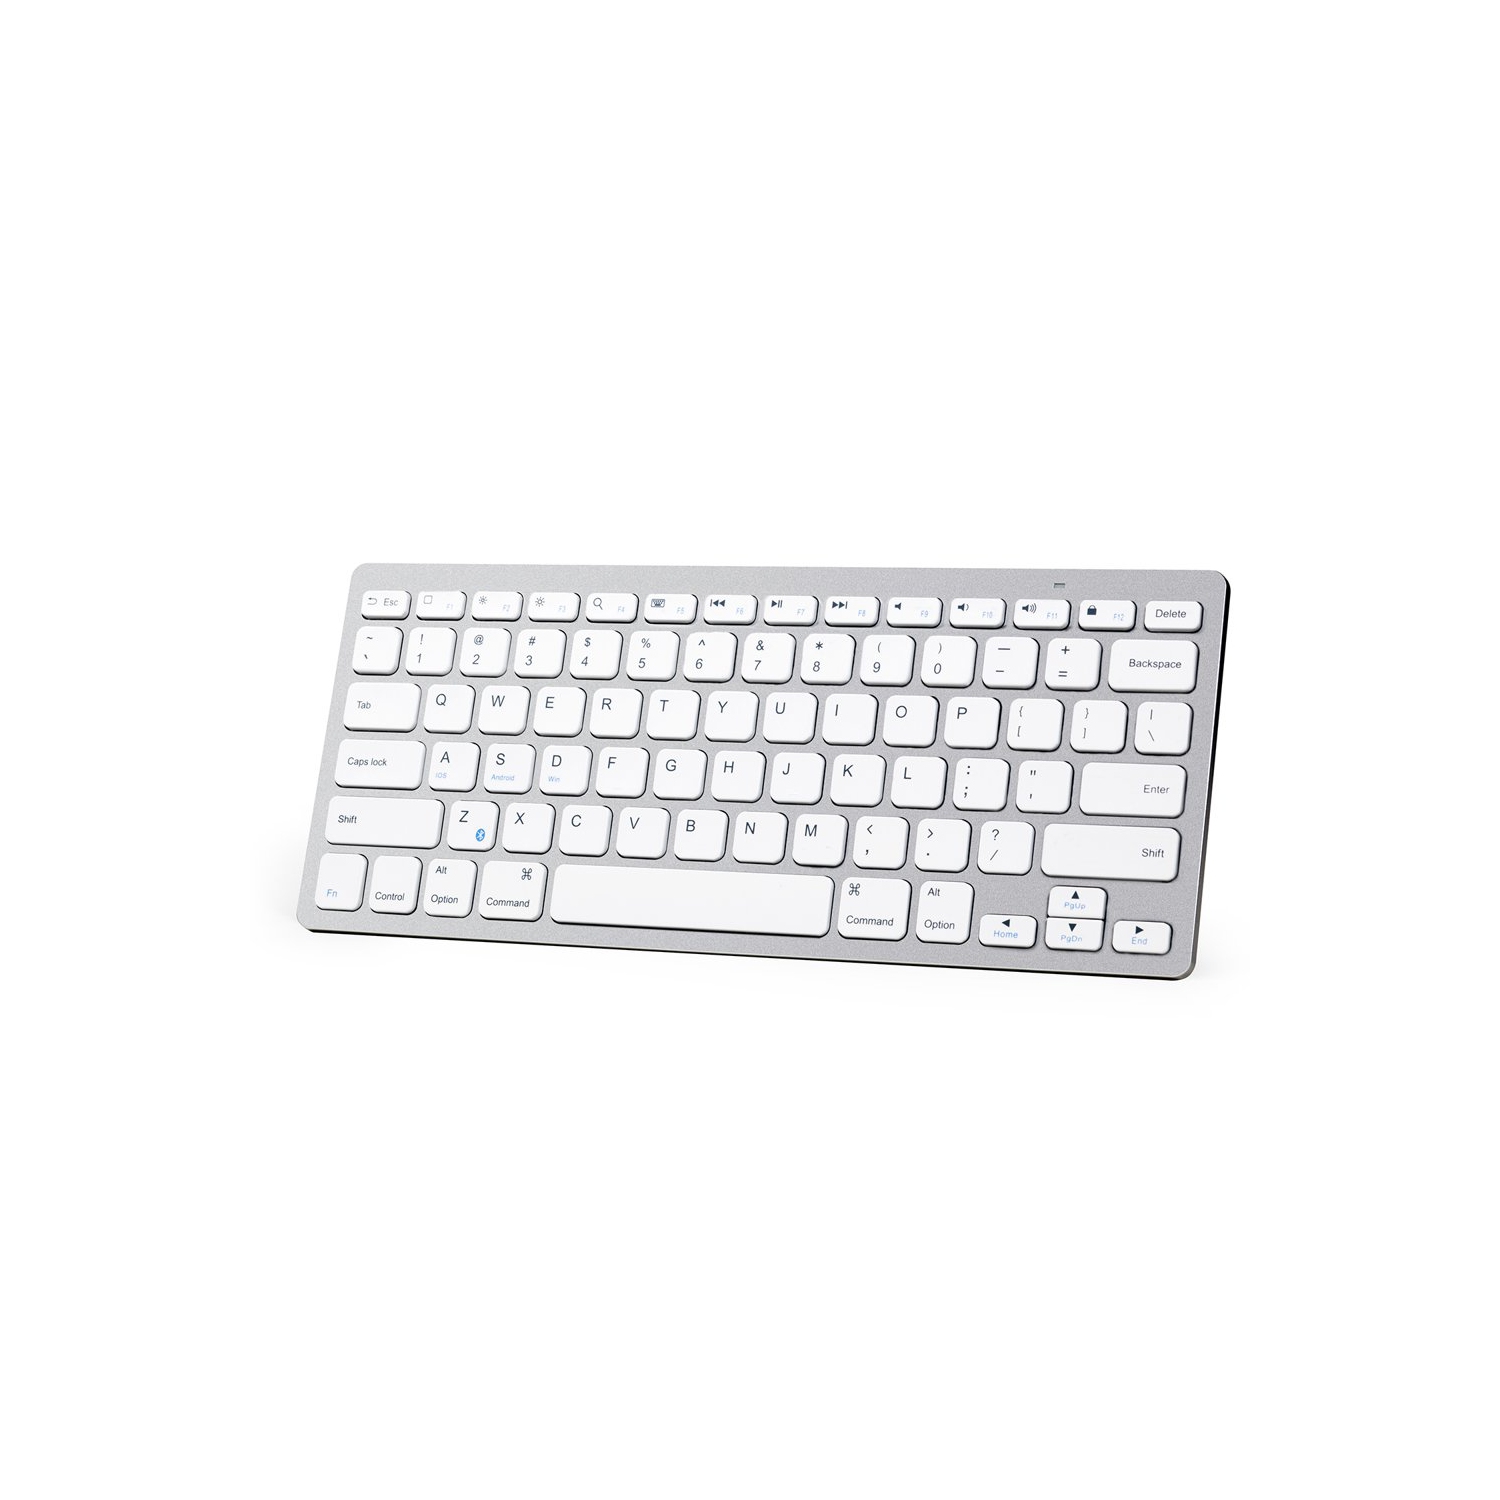 Ultrathin Wireless Bluetooth Keyboard for iPad/iMac/iPhone/Android Phones/Samsung Galaxy Tab and Other Tablets